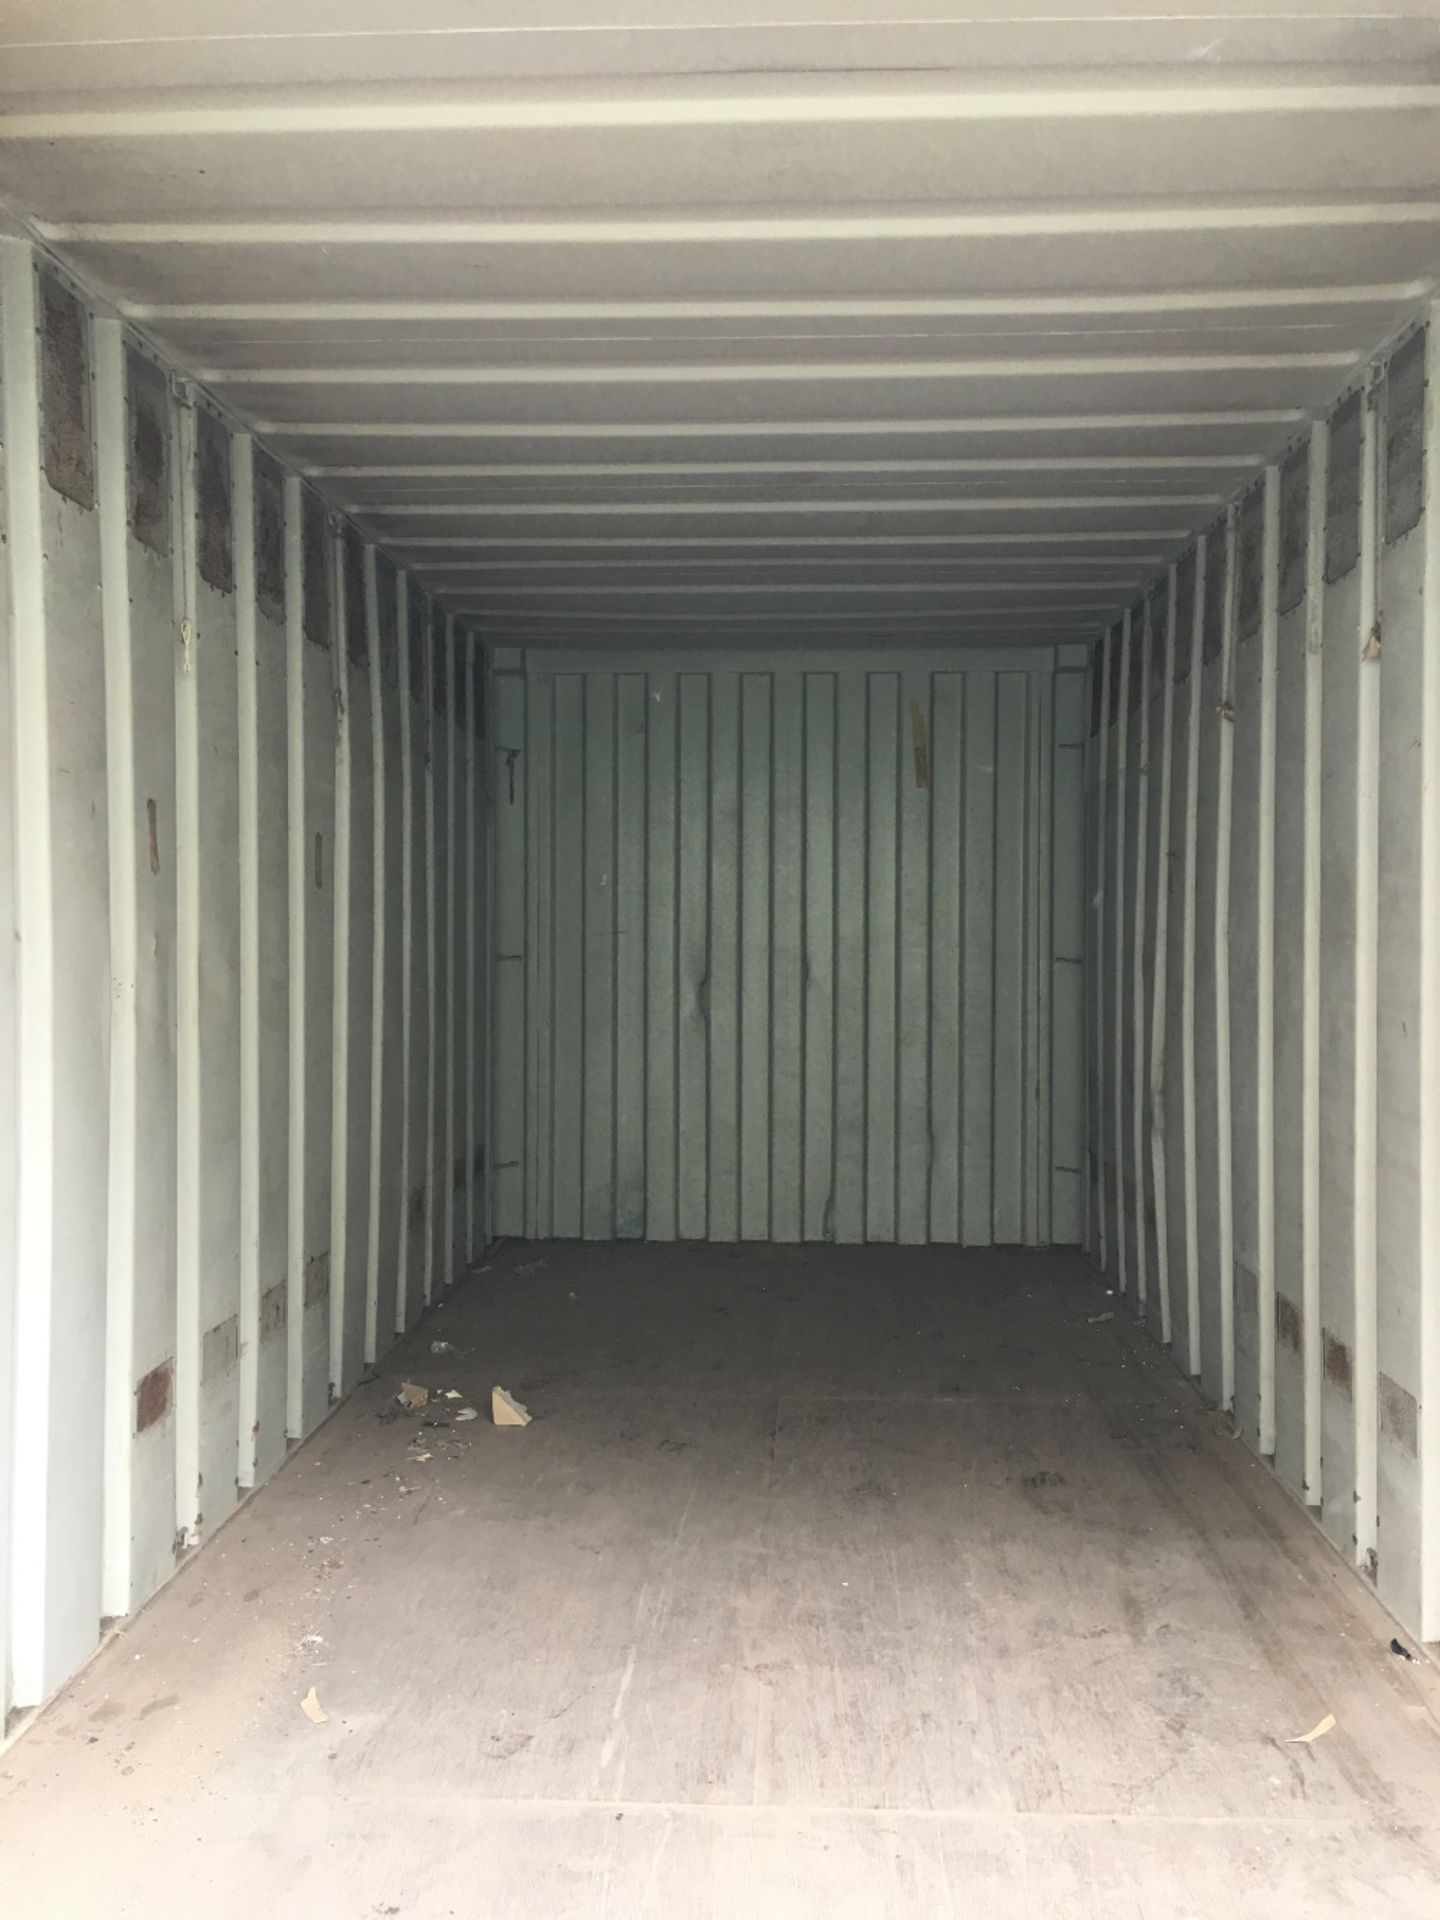 20 x 8 foot double door storage container with locking box B7 - Image 4 of 4